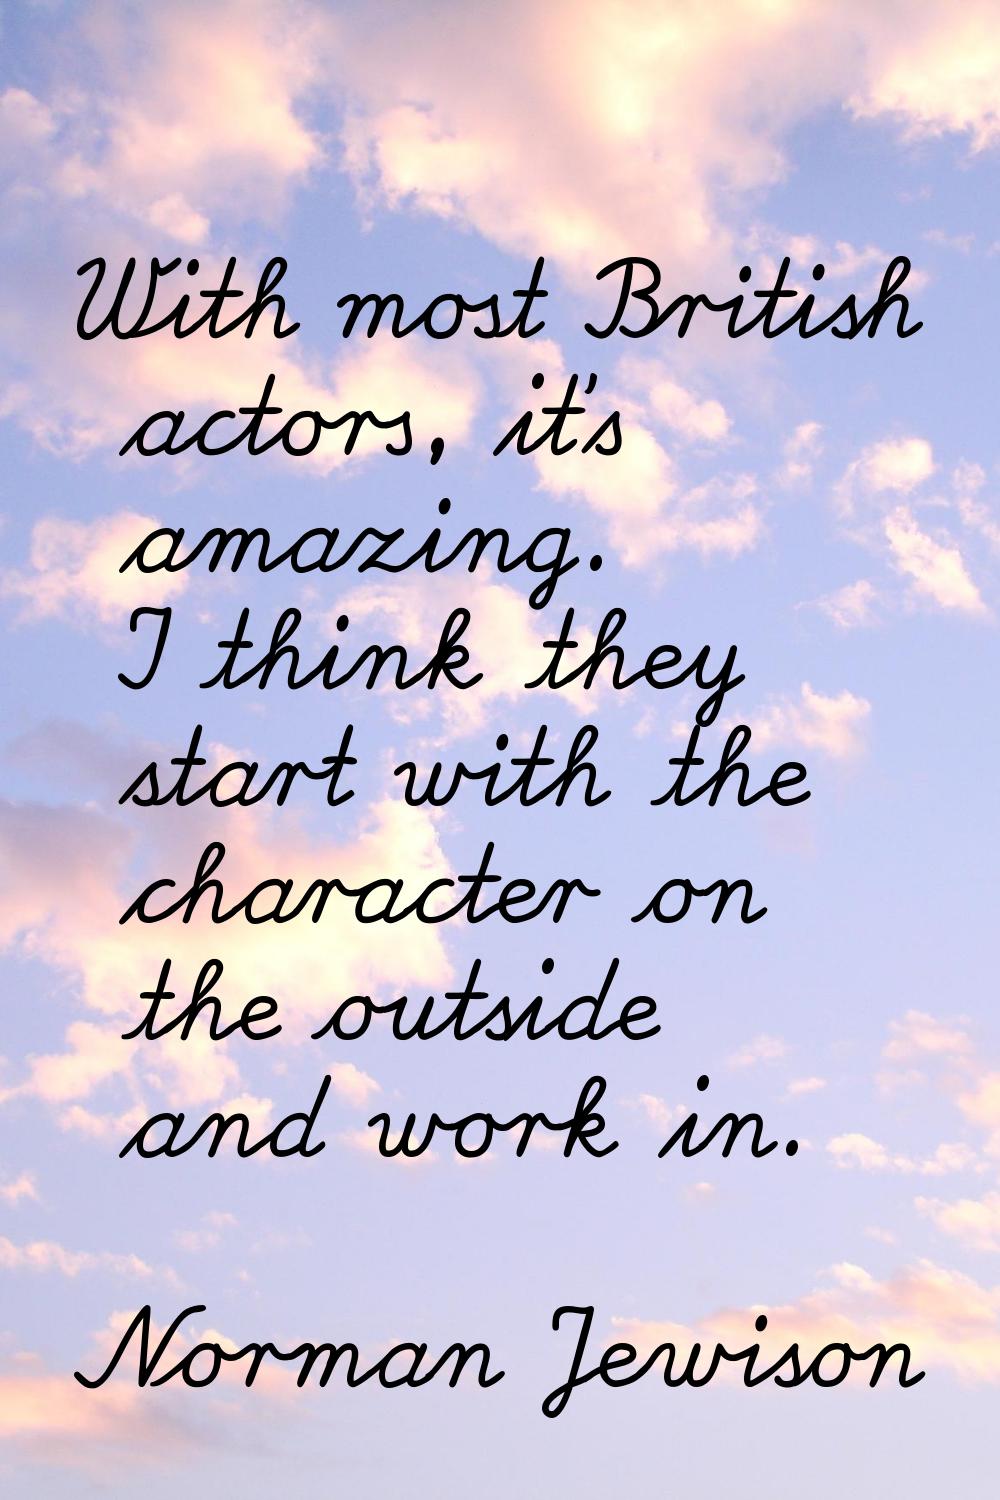 With most British actors, it's amazing. I think they start with the character on the outside and wo